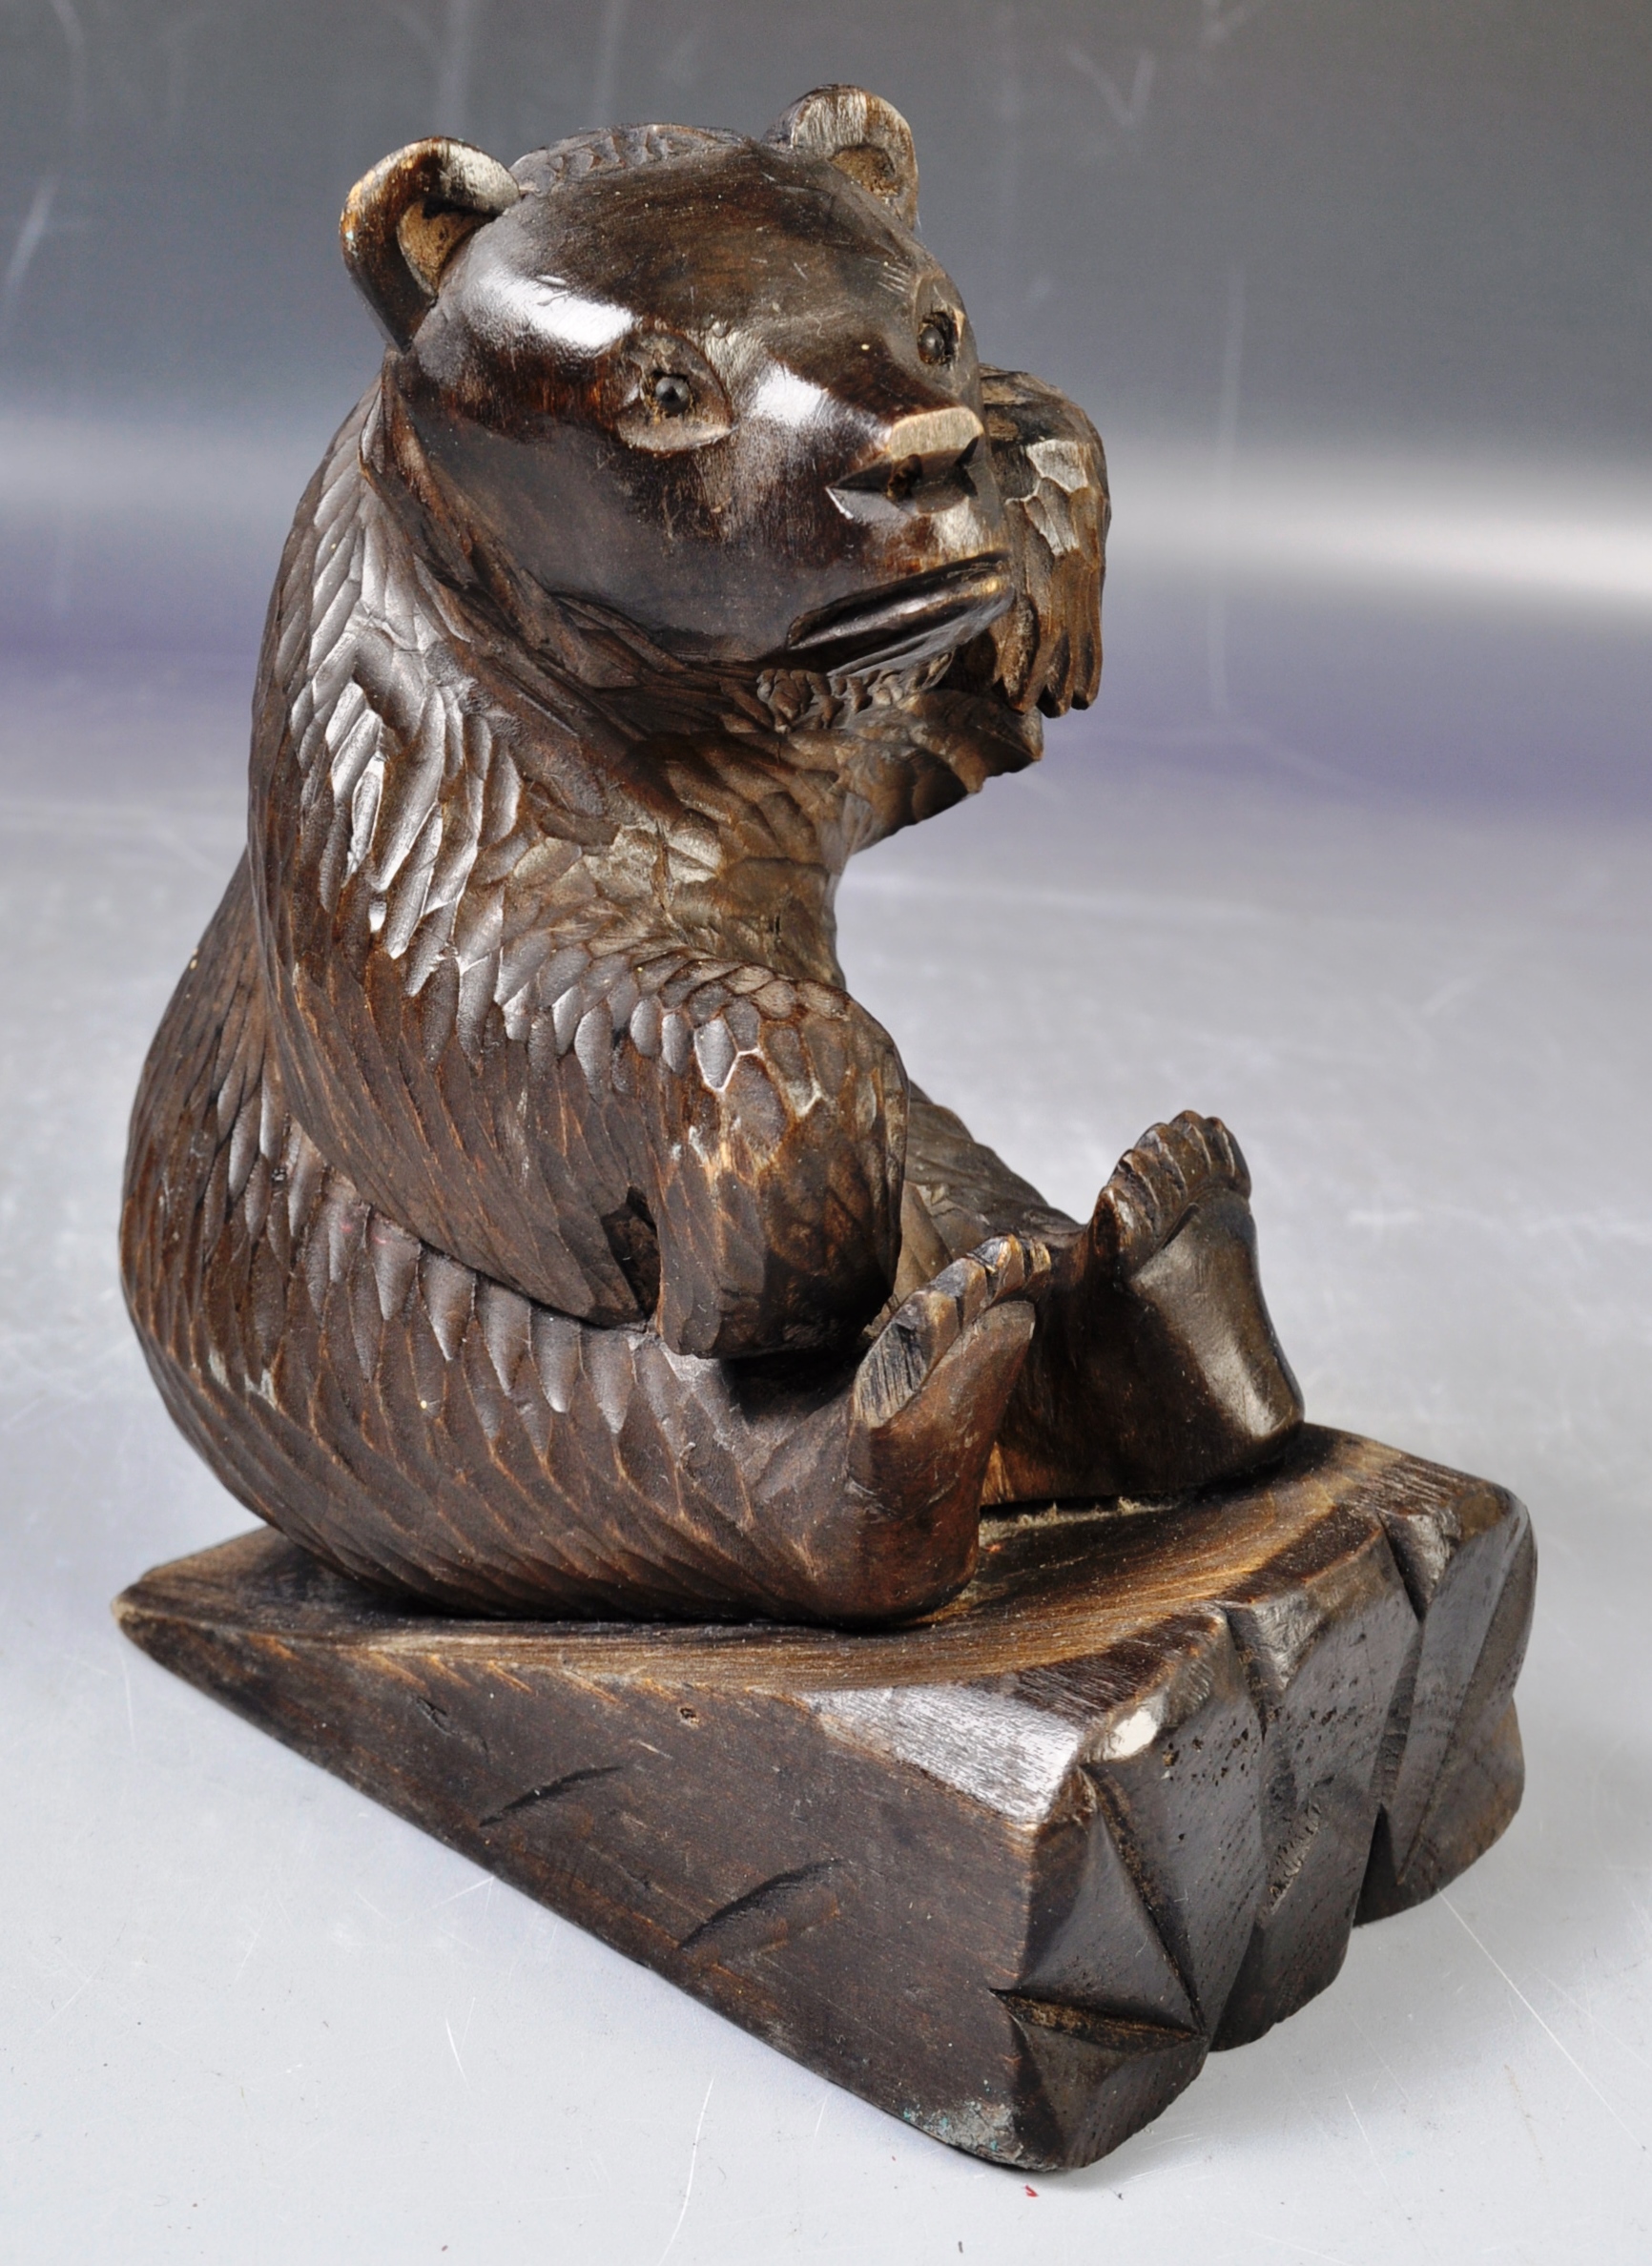 COLLECTION OF ANTIQUE CARVED BLACKFOREST BEAR FIGURINES - Image 5 of 9